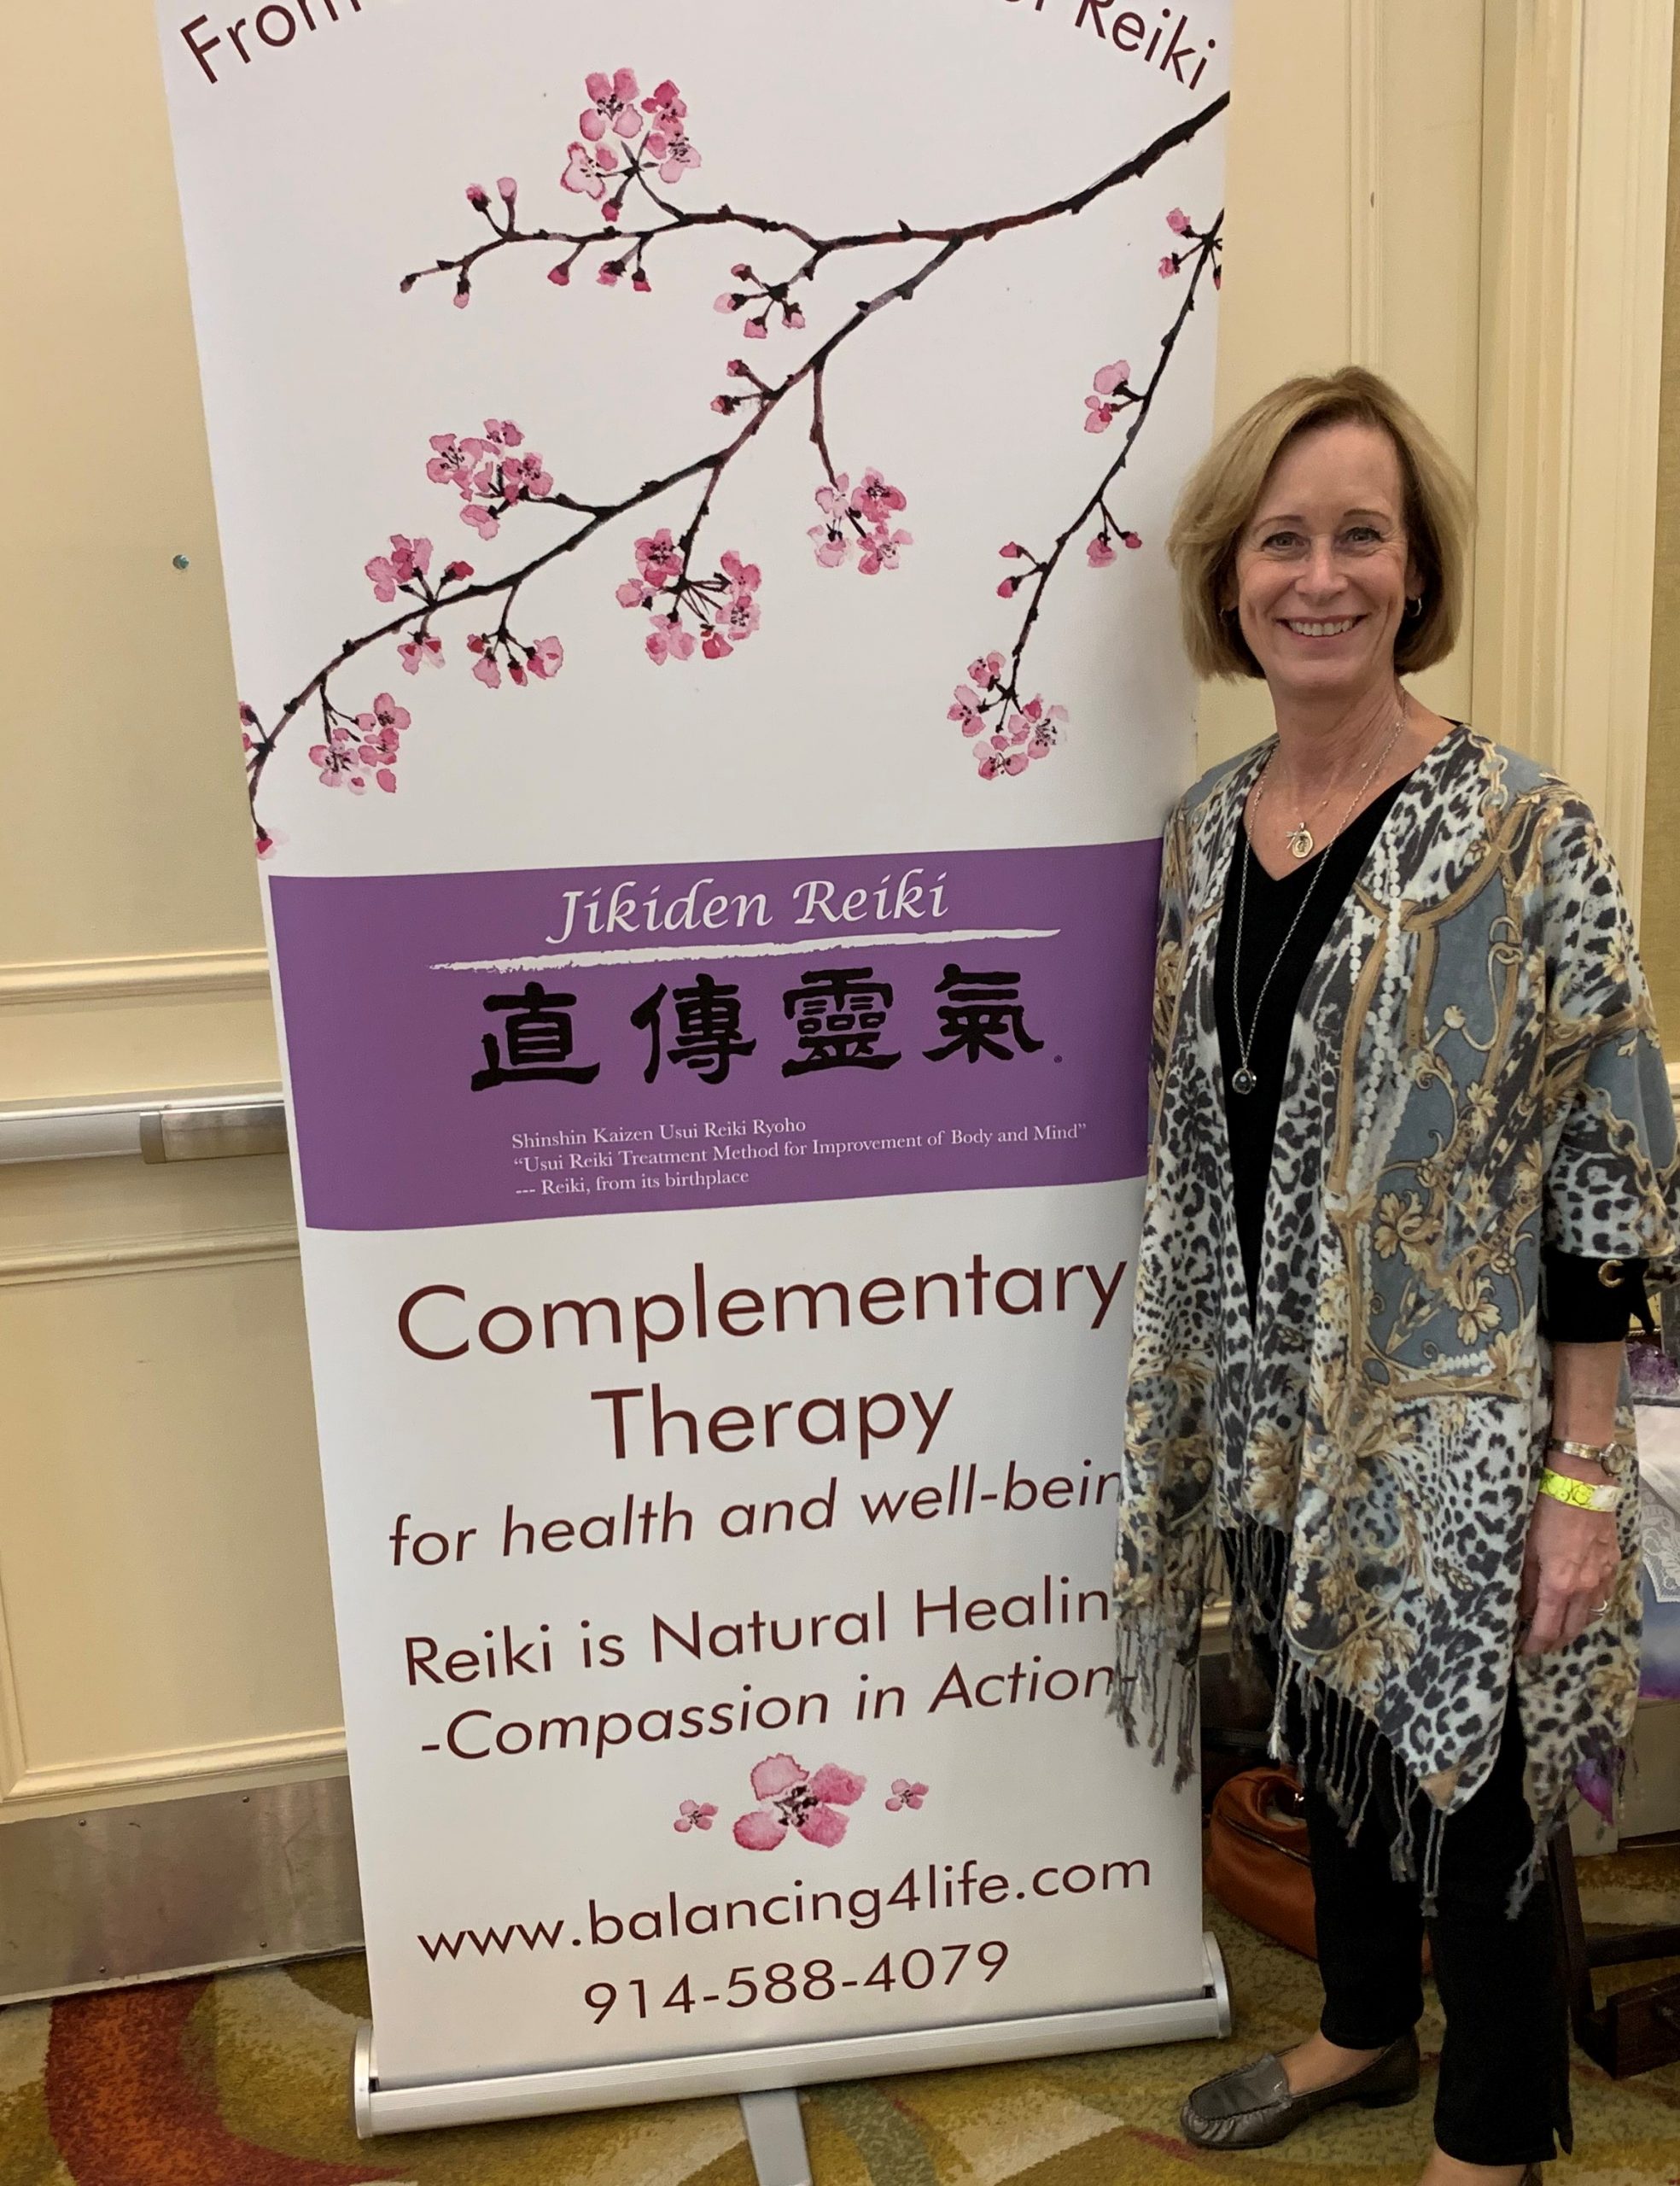 Jikiden Reiki teacher, practitioner, energetic counselor and transformational healer - Pleasantville NY